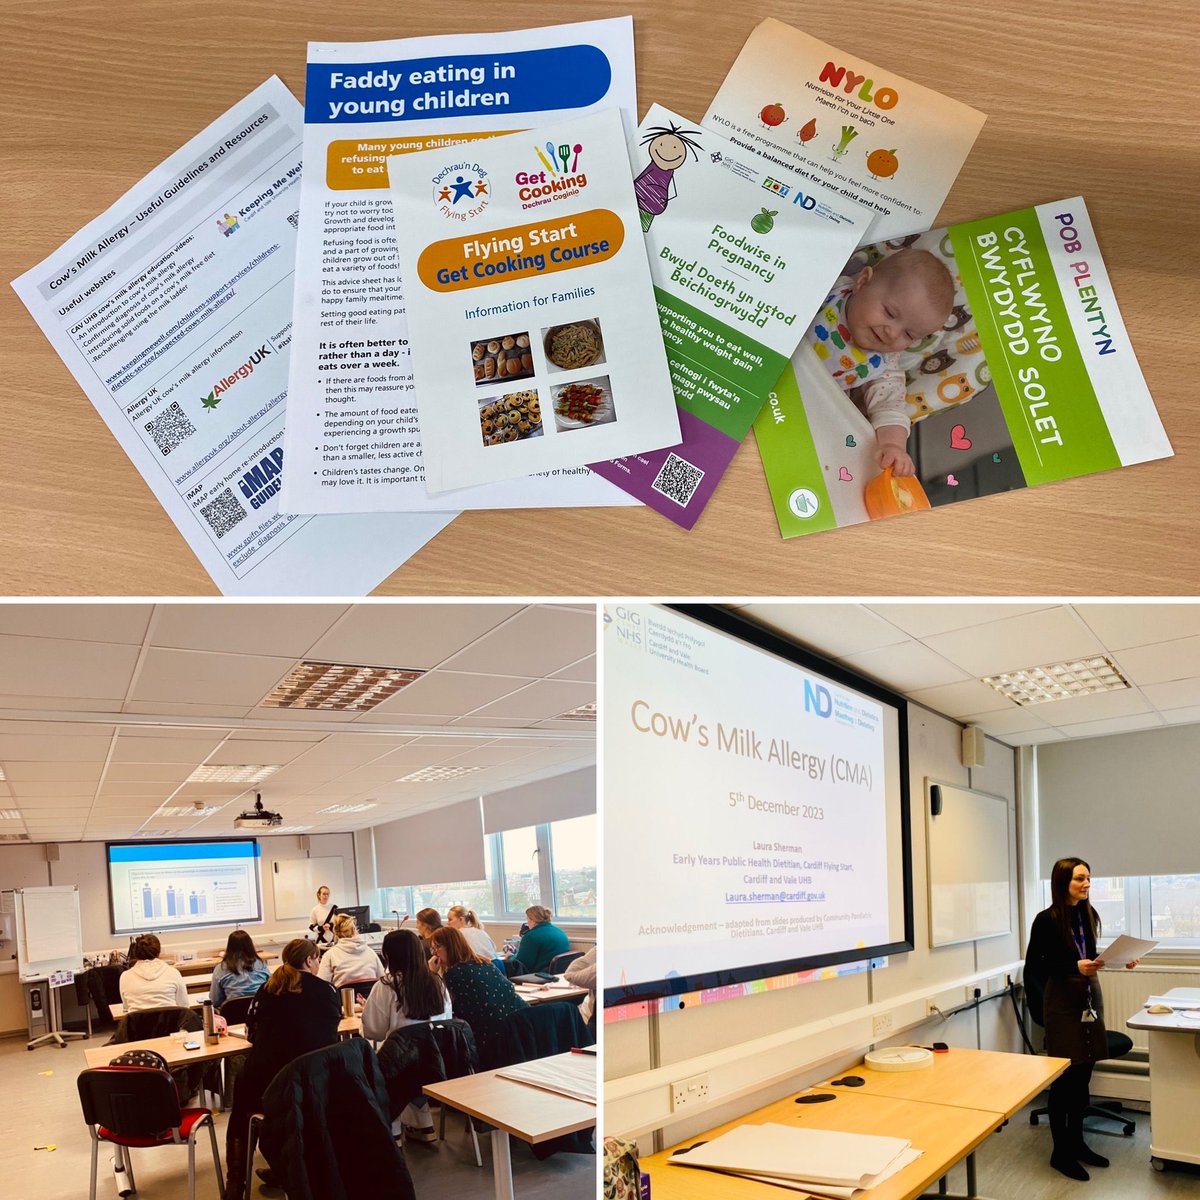 A great 2 days teaching #earlyyearsnutrition on the SCPHN course to future #healthvisitors. Joint delivery with public health and community paediatric dietetics. @rachelraymond27 @emlooker100 @nutritionskills @cav_dietetics @LS_Dietetics @JuliaSpiers @Fiona_regan_RD @heidyarnot